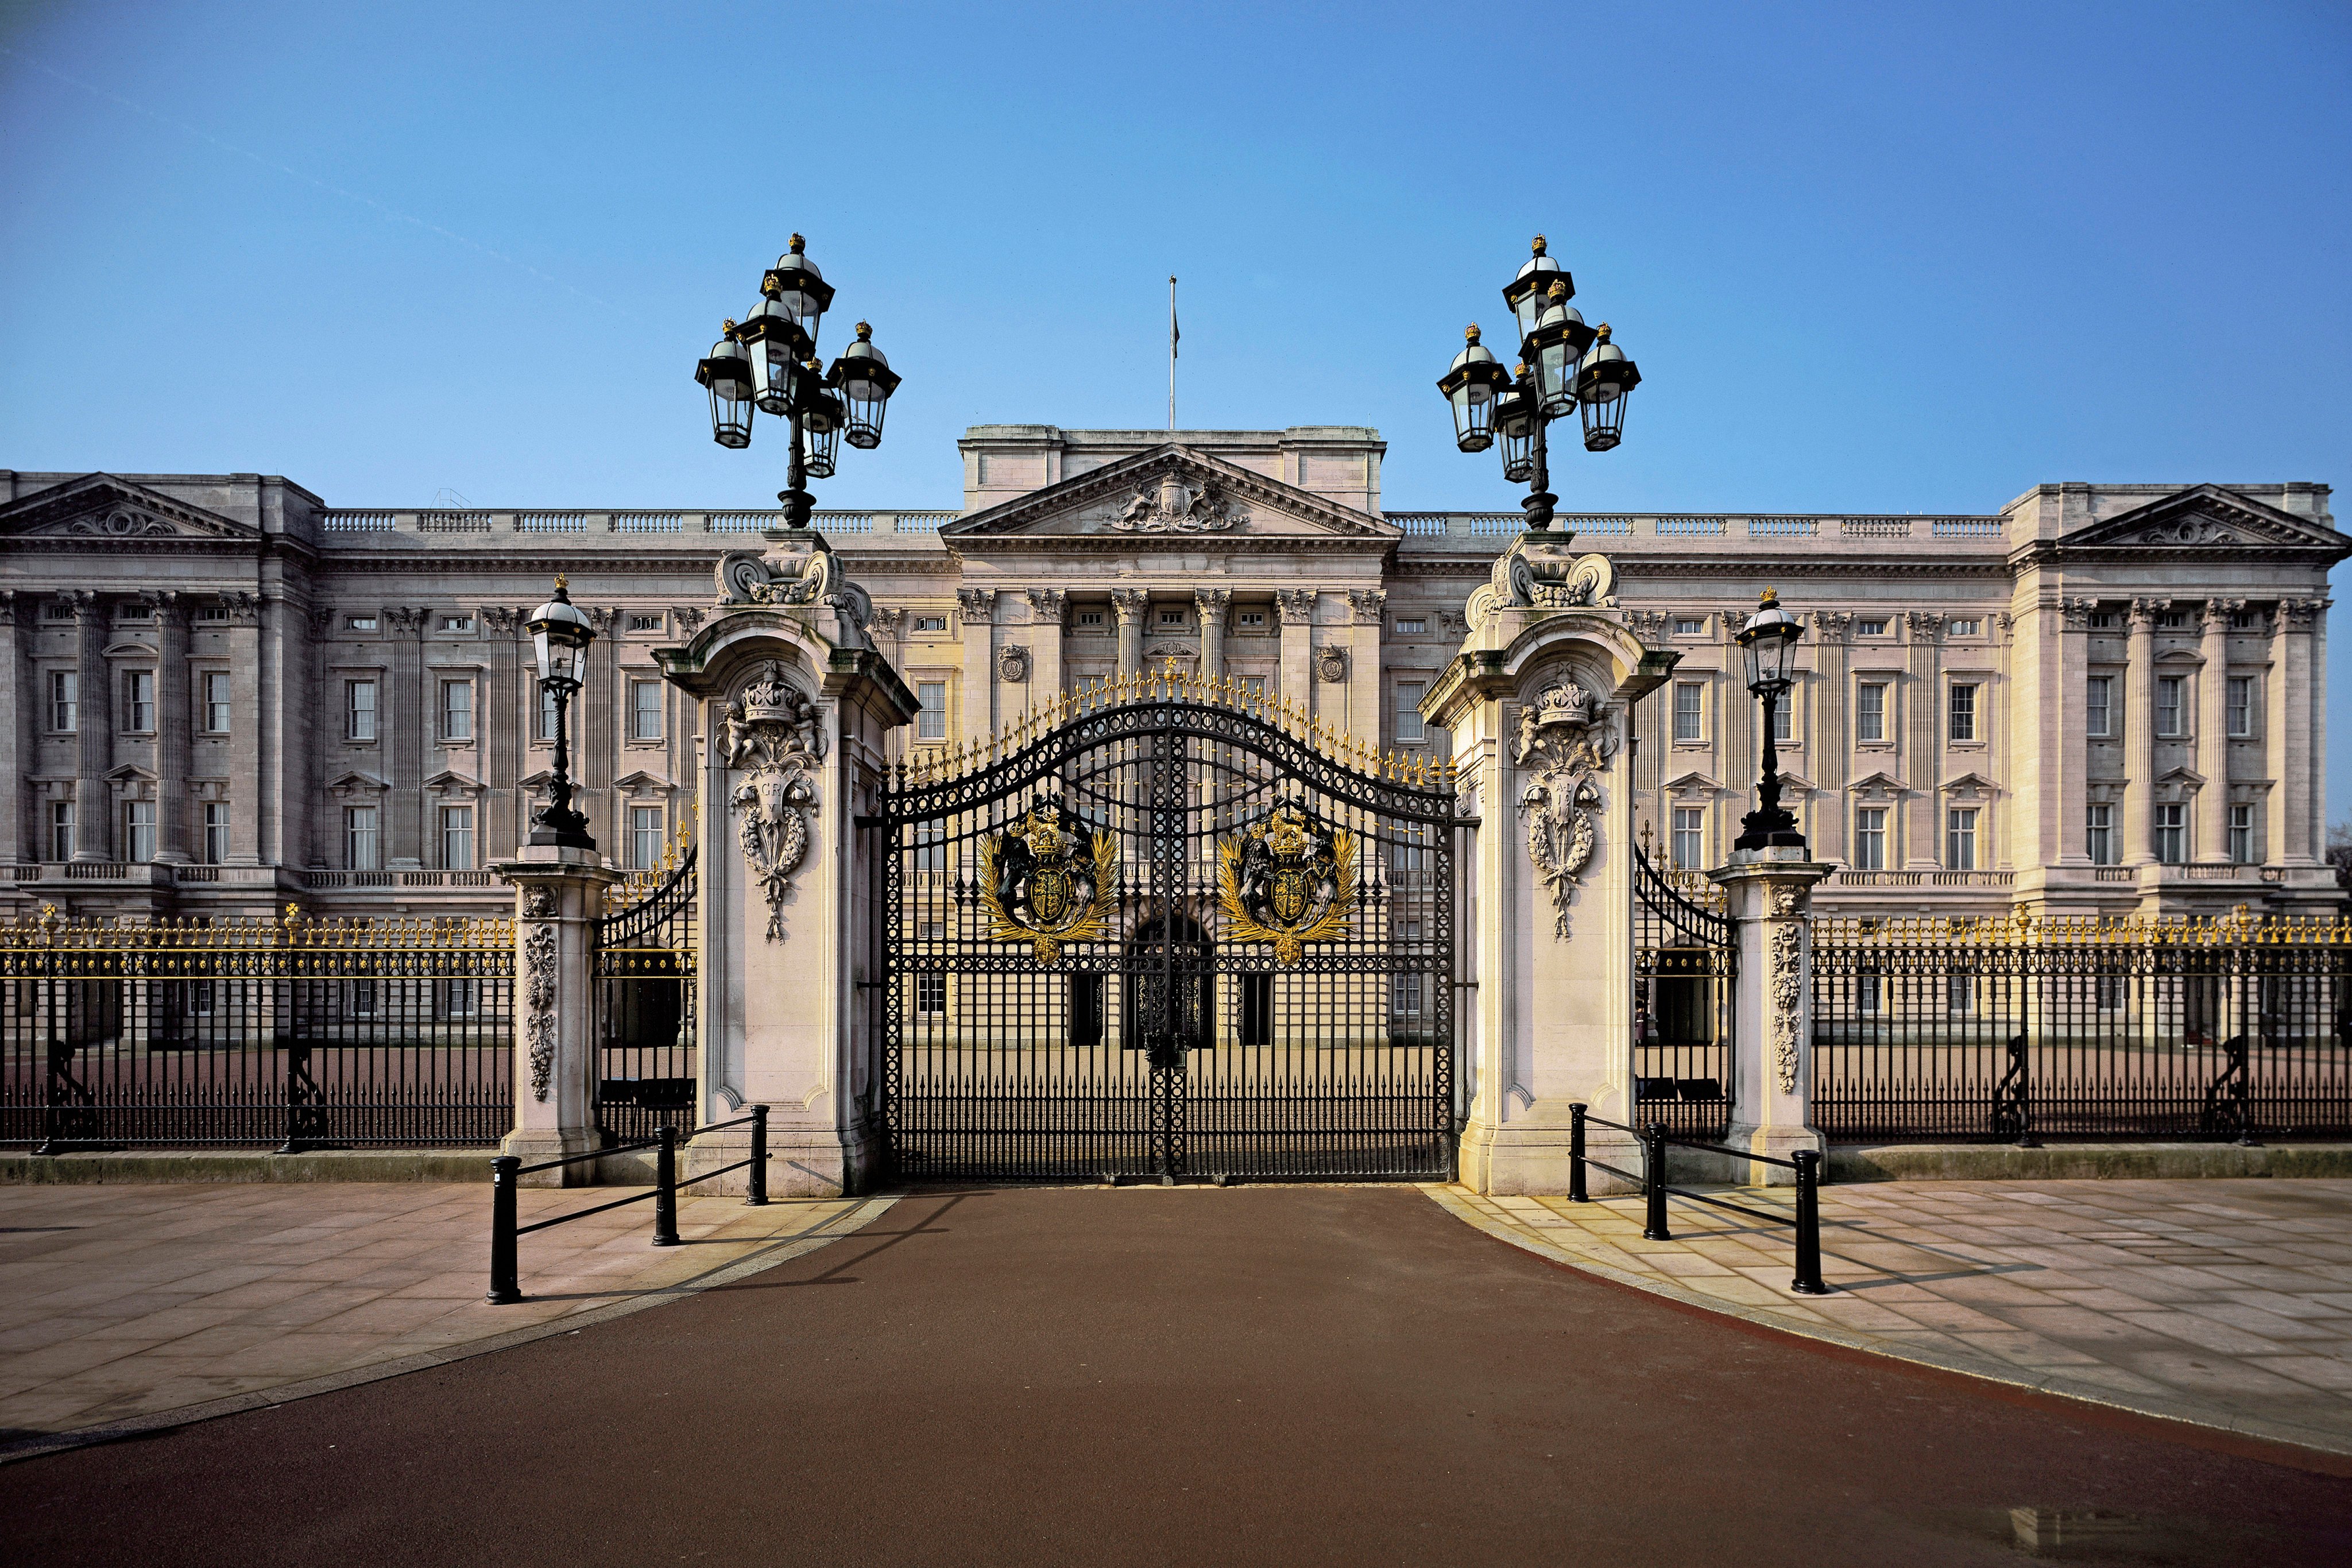 Buckingham Palace gates, London.&#xA;&#xA;Credit:  Andrew Holt / Royal Collection Trust &#xA;&#xA;All Rights Reserved Images are for single use only in news reporting in connection with the special display Platinum Jubilee: The Queen’s Accession at the Summer Opening of the State Rooms at Buckingham Palace and are not to be archived, sold on to third parties or used out of context.”